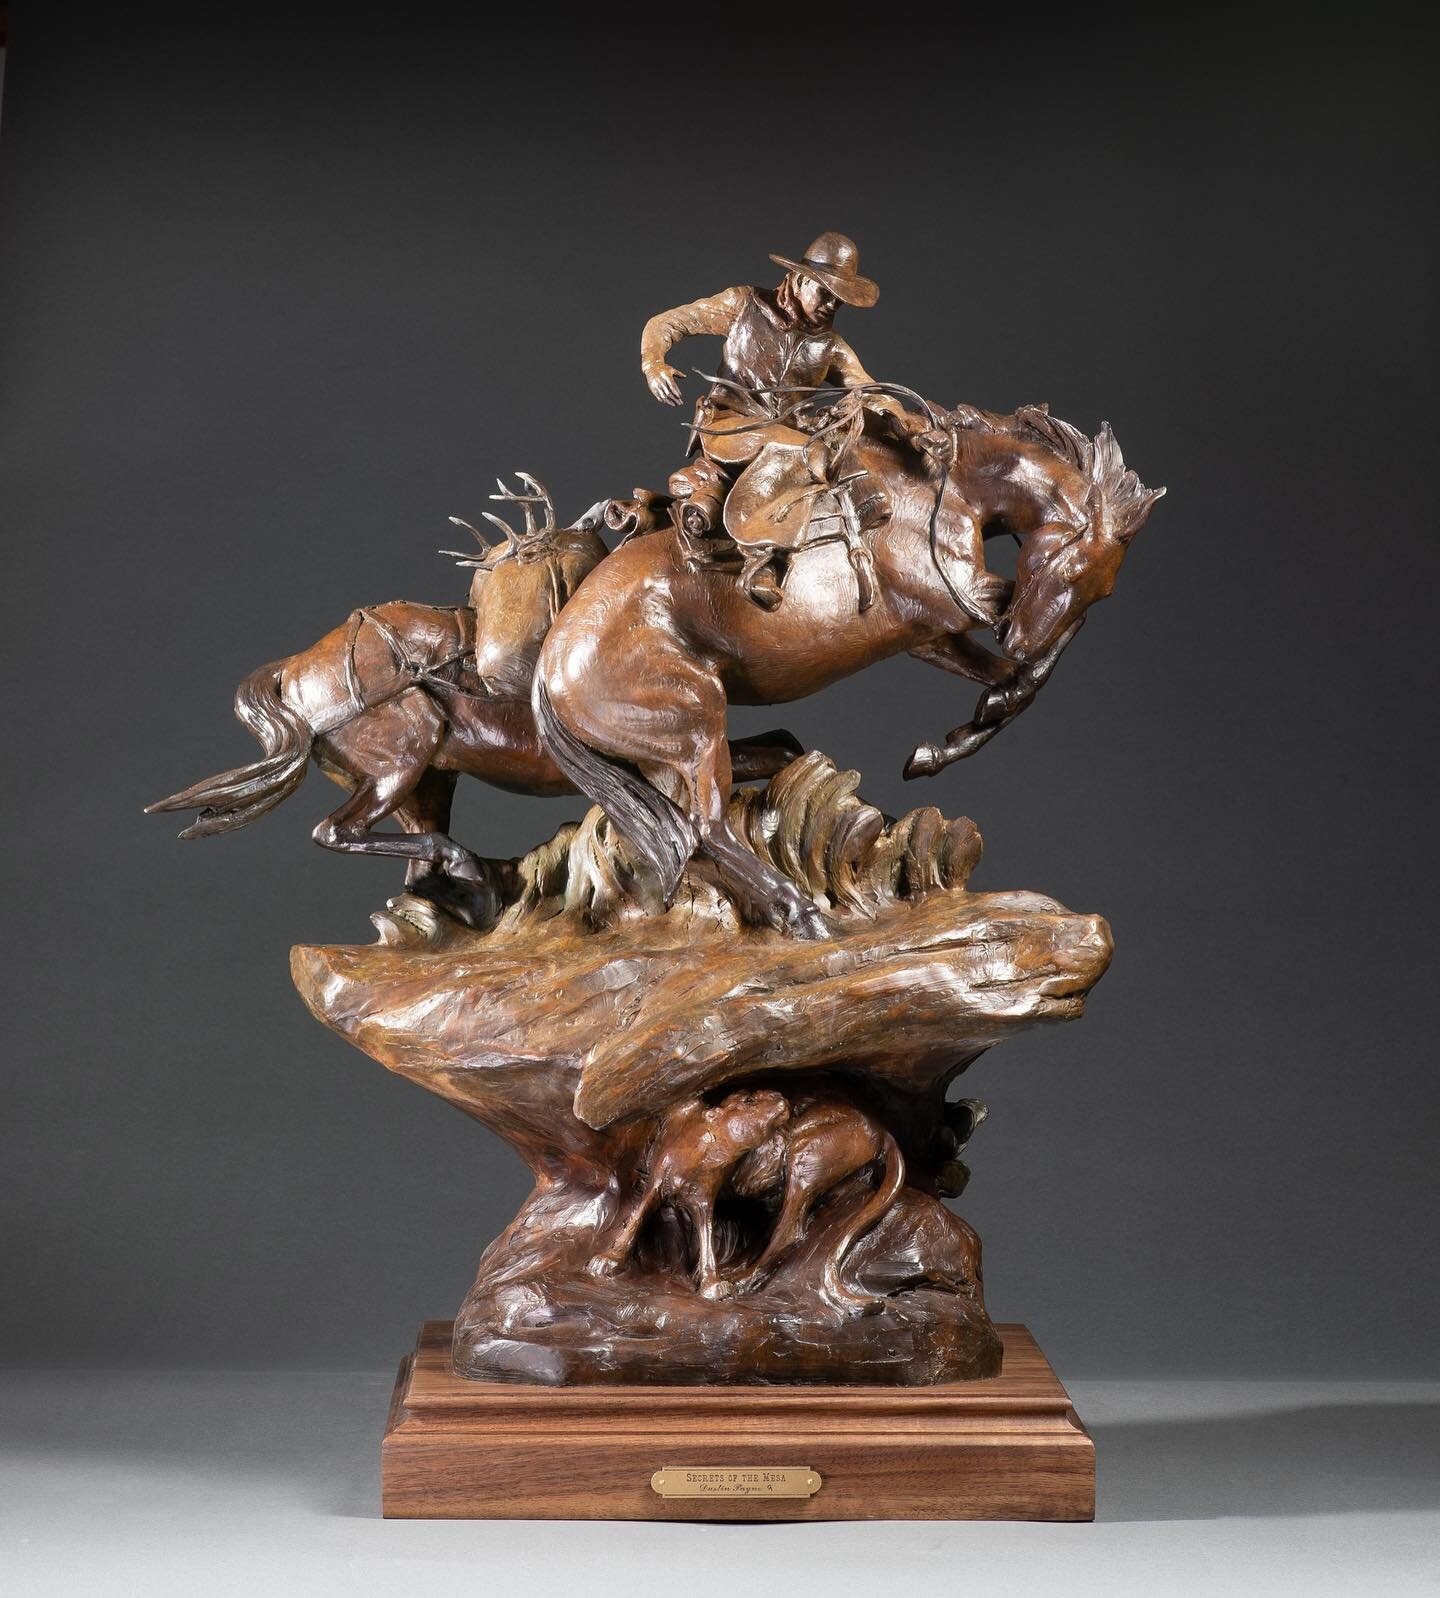 Secrets of the Mesa | Limited Edition of 20 in bronze⁠
27&quot;H x 21&quot;W x 12&quot;D⁠
⁠
I'm headed to Texas next week to deliver all of my work for this year's Cowboy Artists of America Show coming up early next month. Secrets of the Mesa is one 